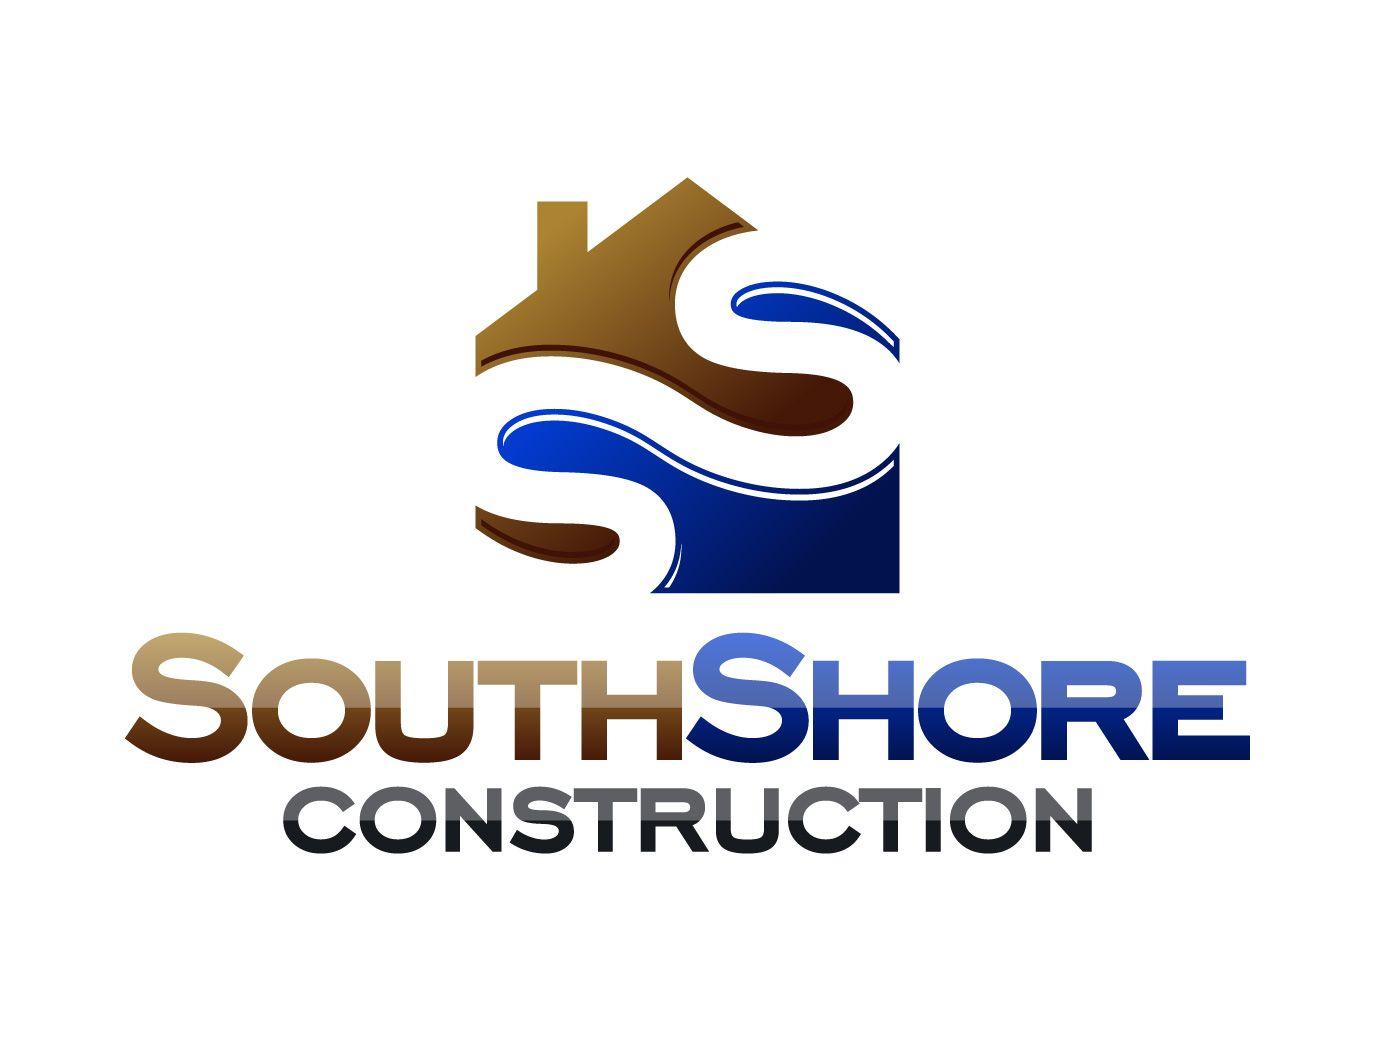 General Contractor Construction Company Logo - Do You Have A Logo For Your General Contracting Business? - Business ...